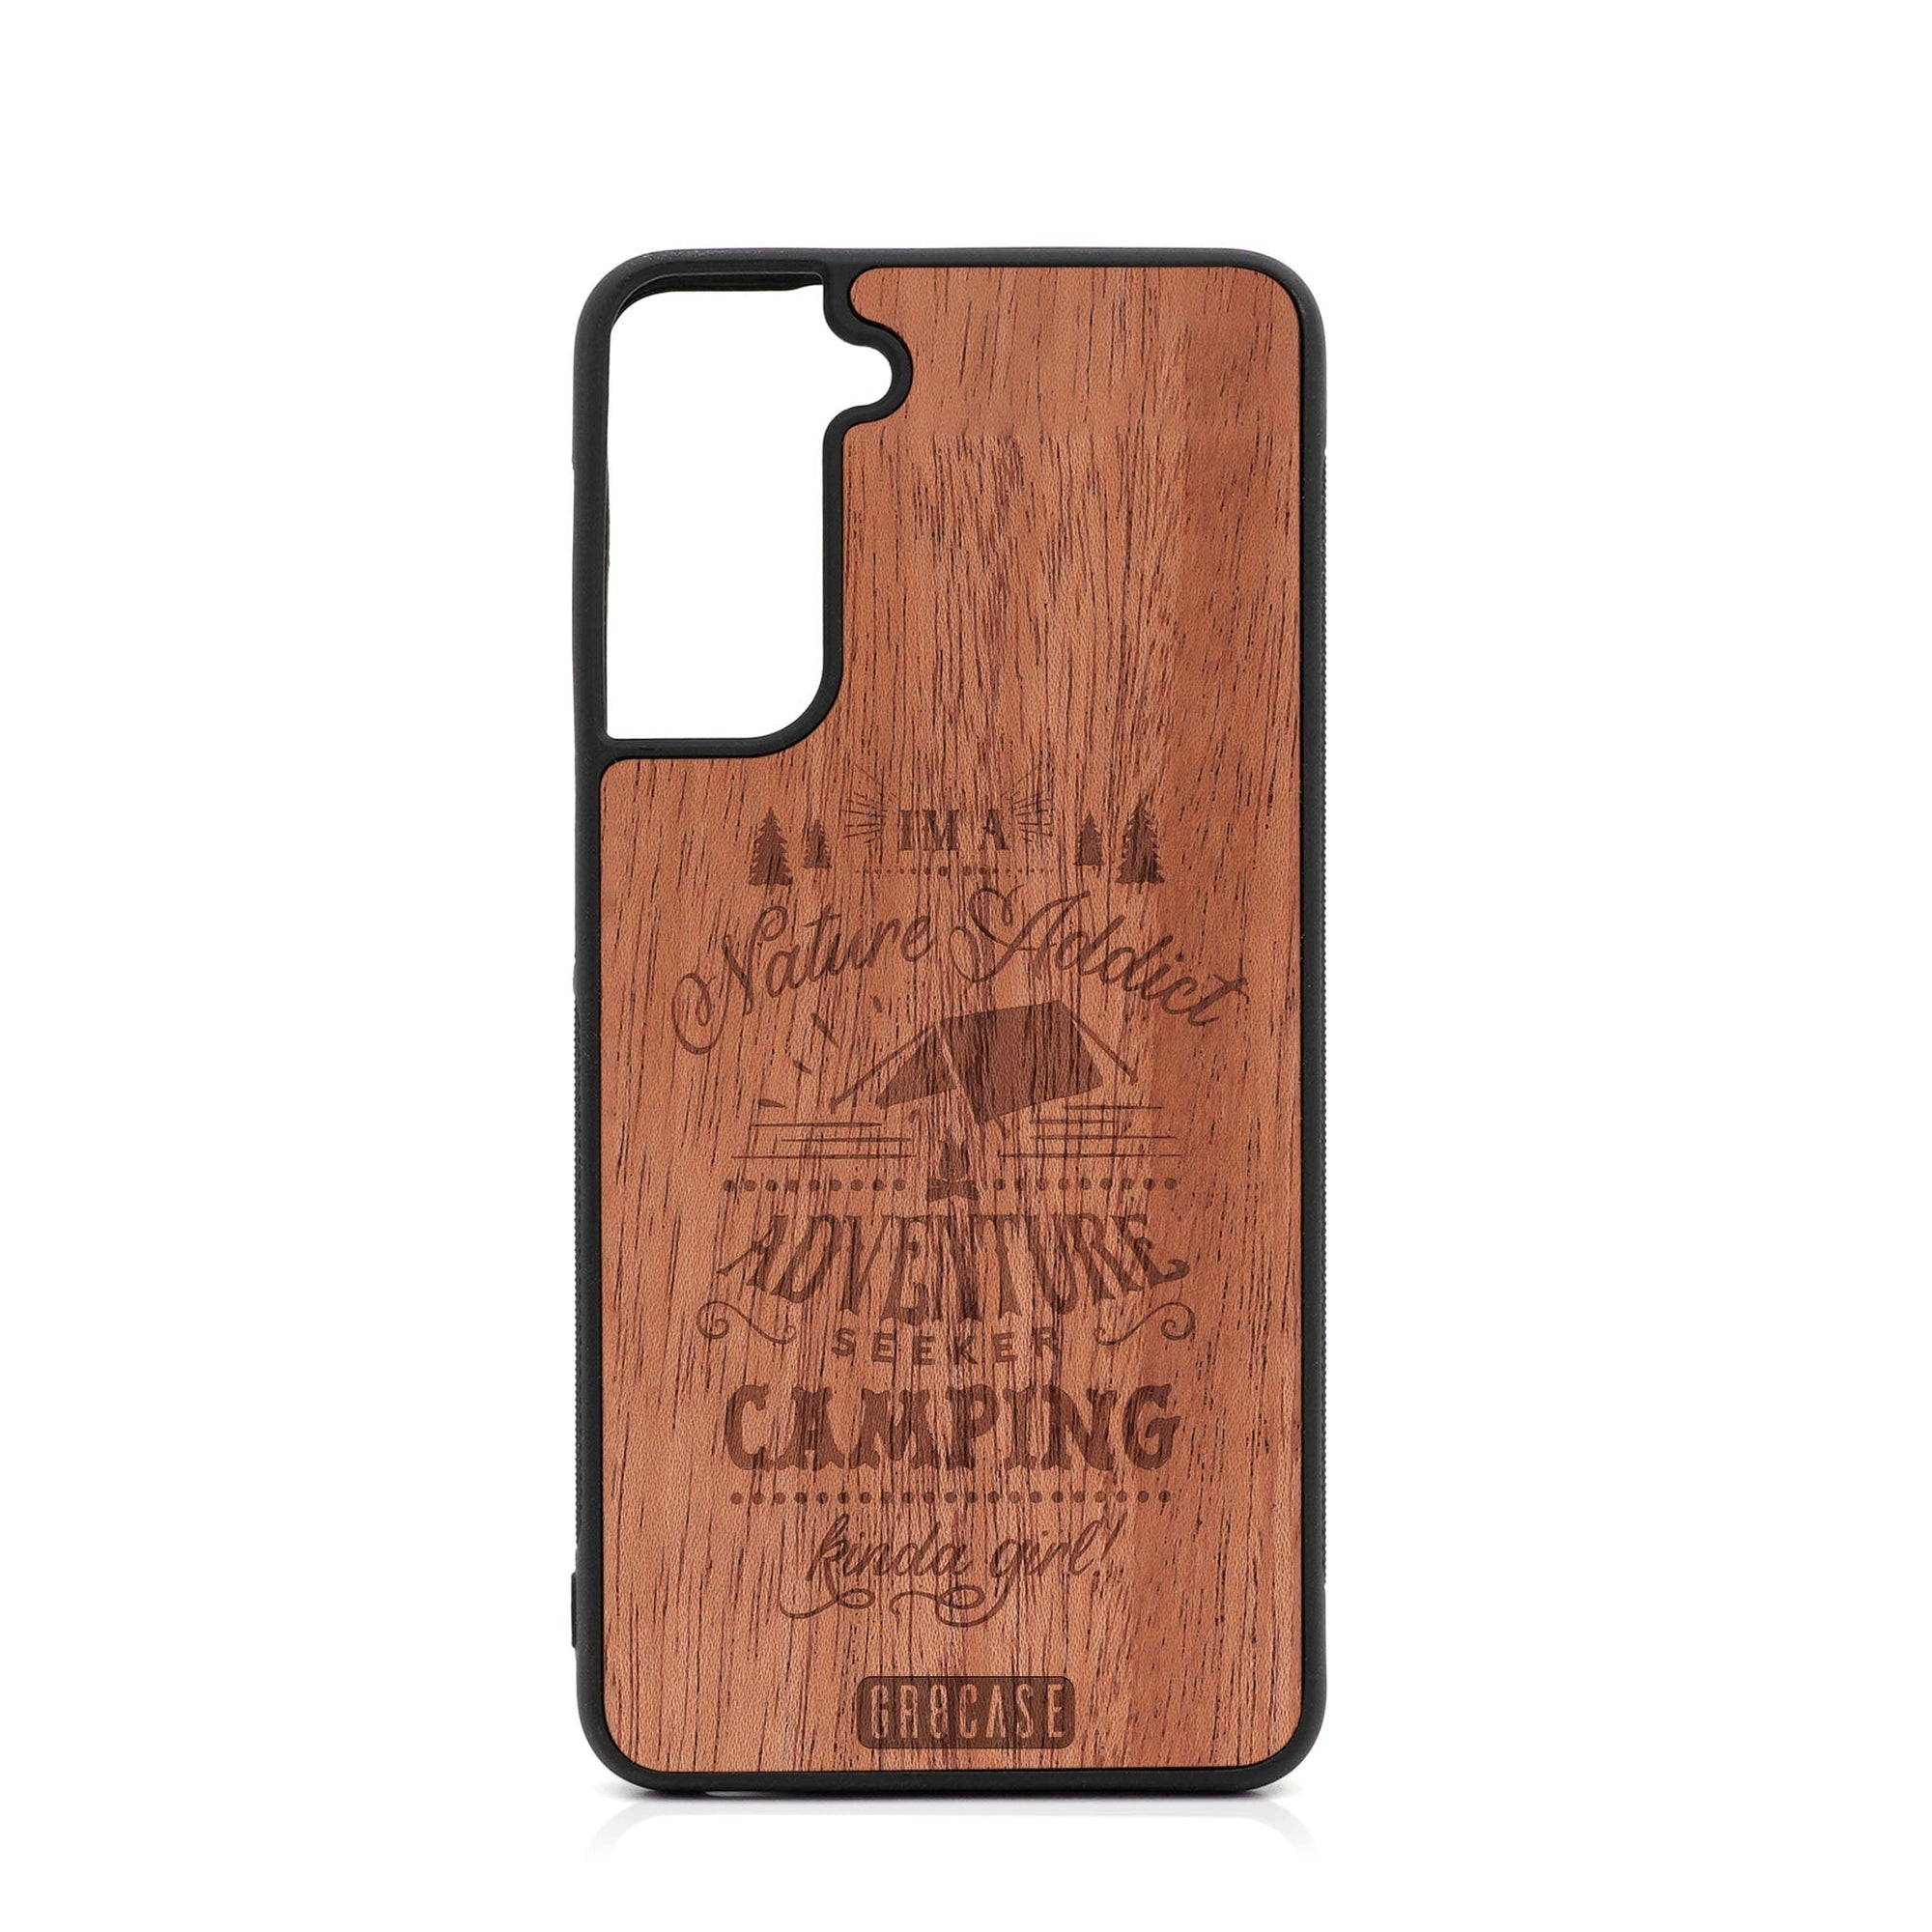 I'm A Nature Addict Adventure Seeker Camping Kinda Girl Design Wood Case For Samsung Galaxy S21 FE 5G